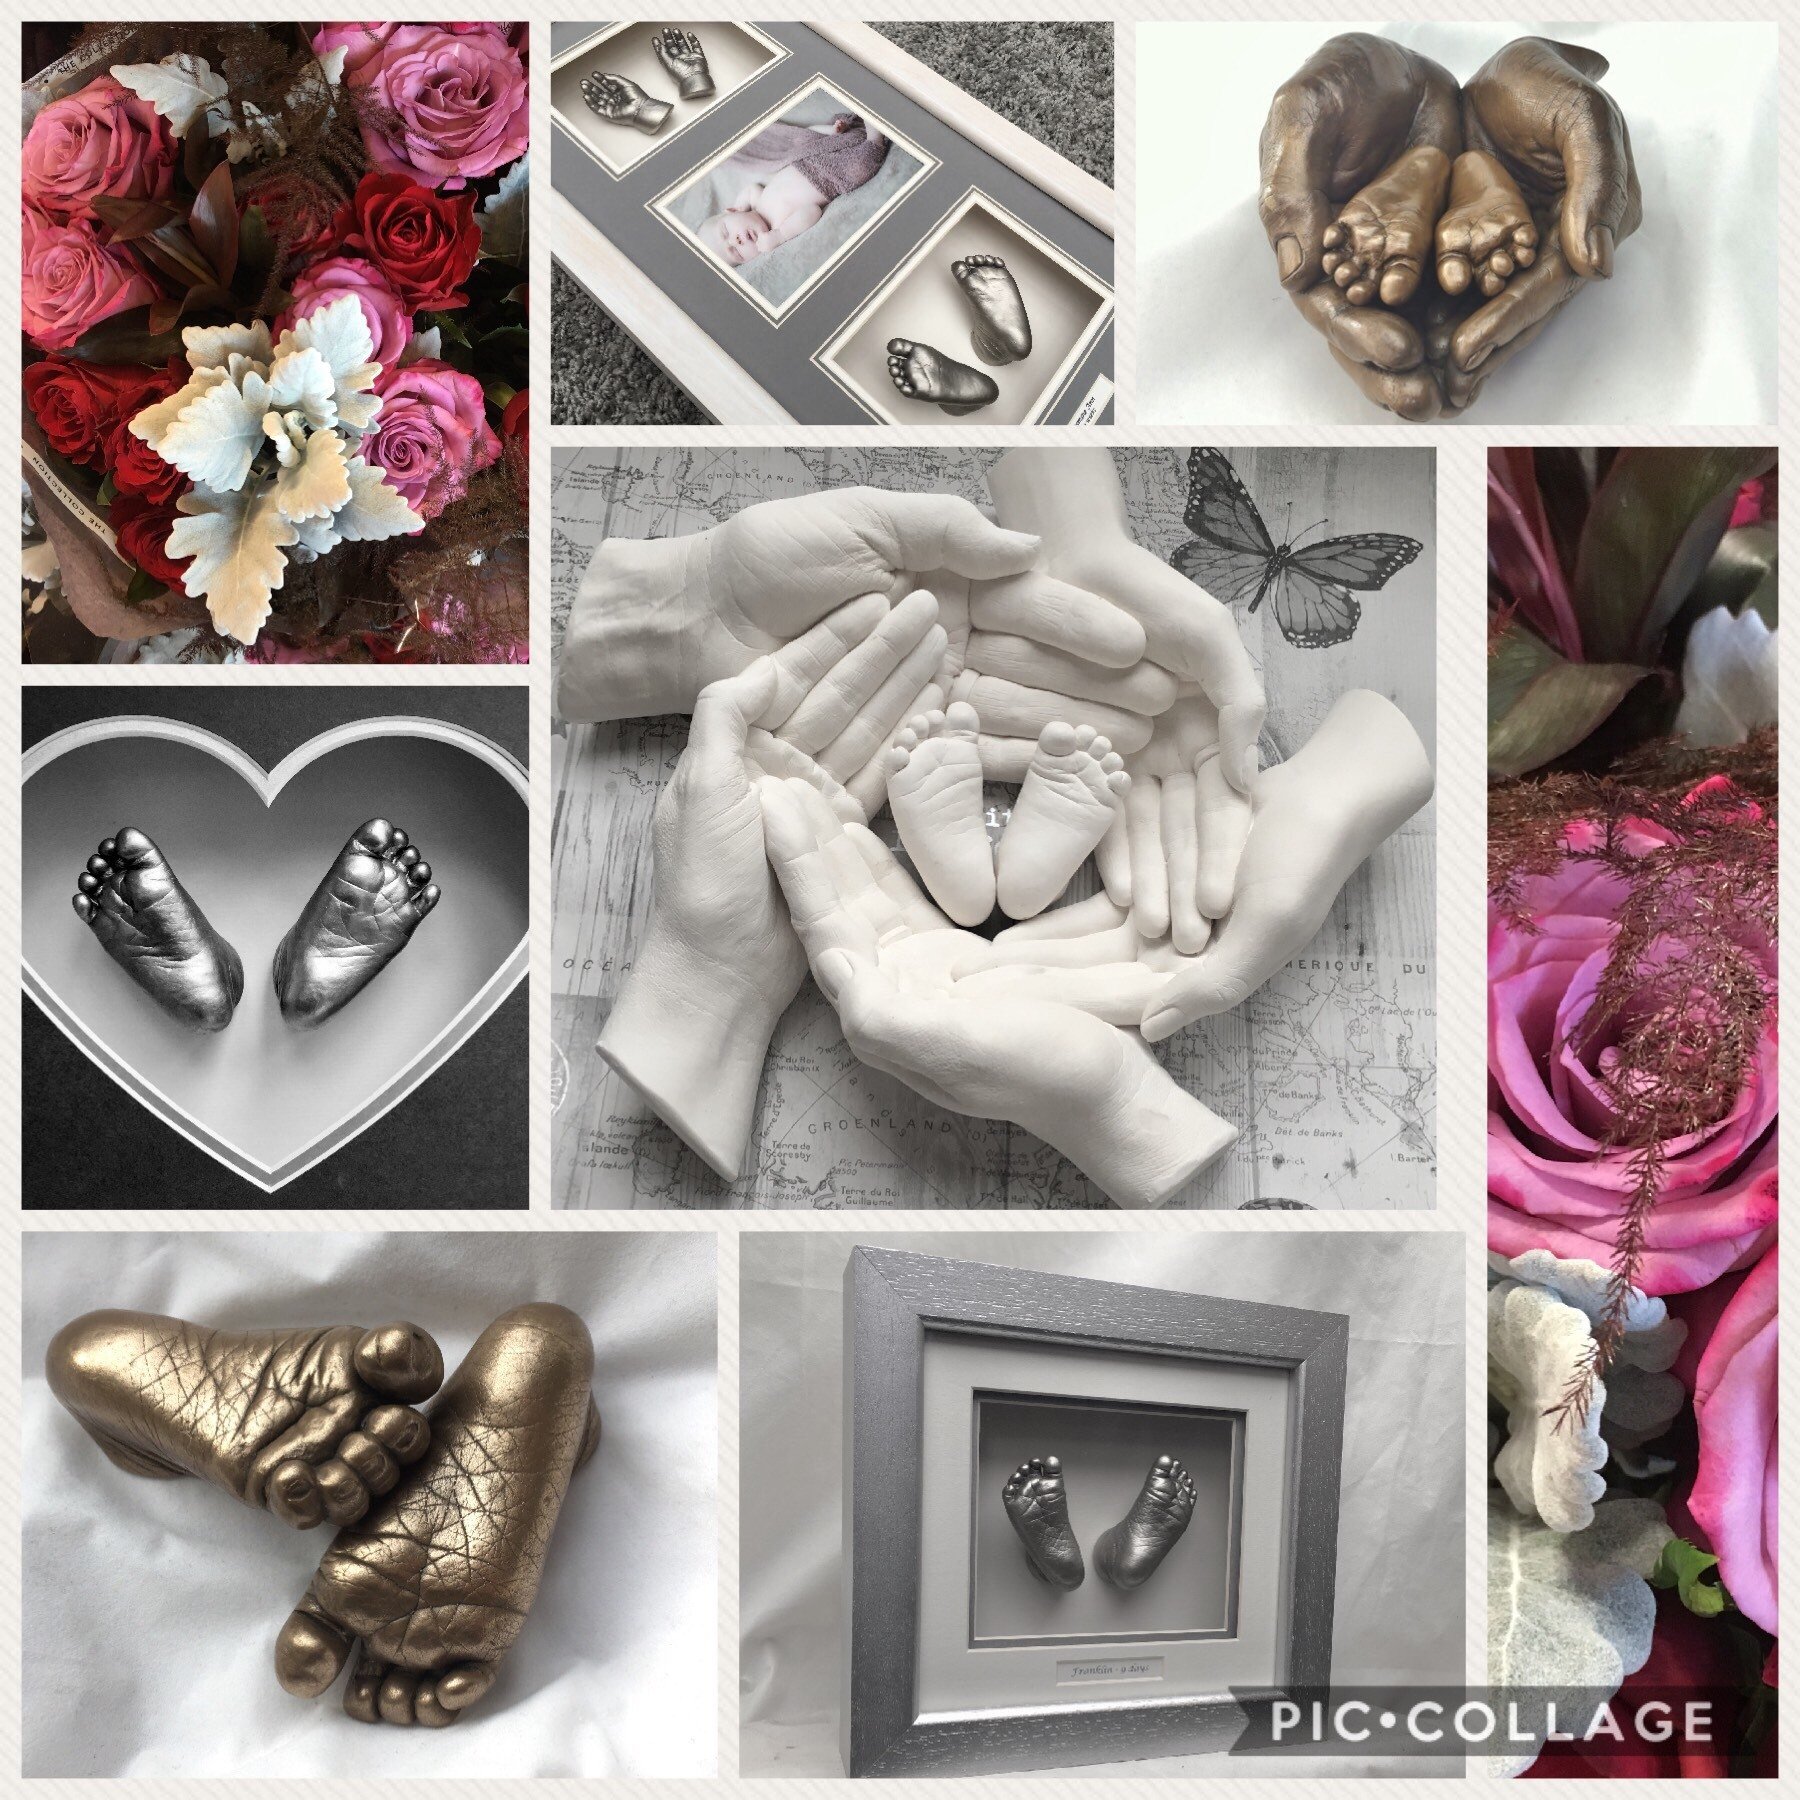 Mothers Day personalised gifts in Herts